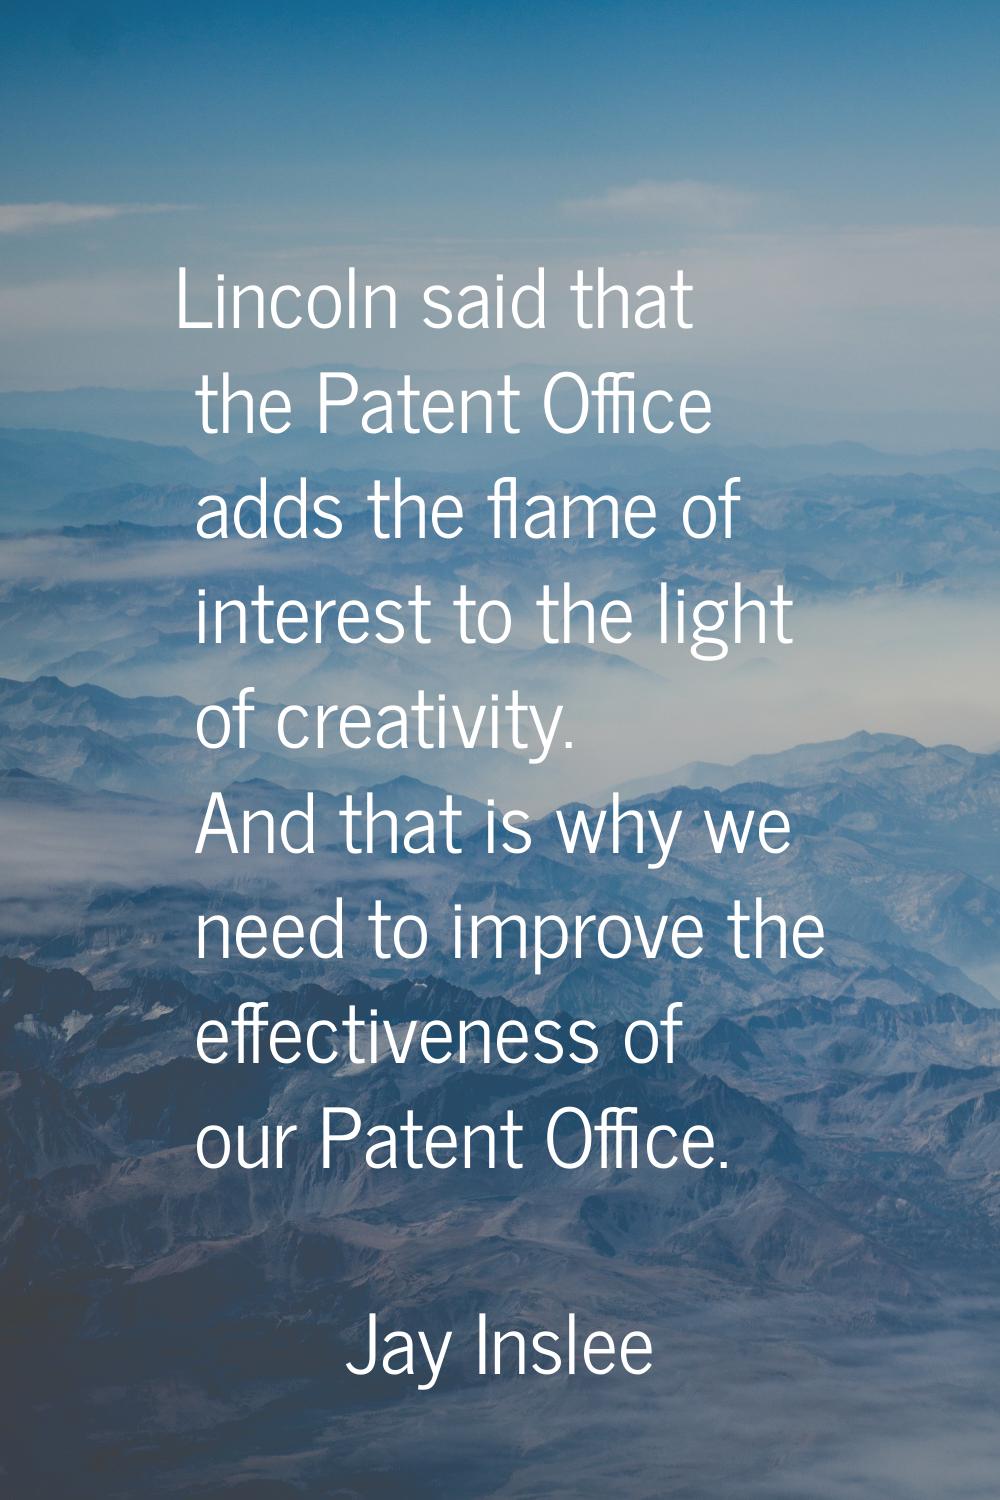 Lincoln said that the Patent Office adds the flame of interest to the light of creativity. And that